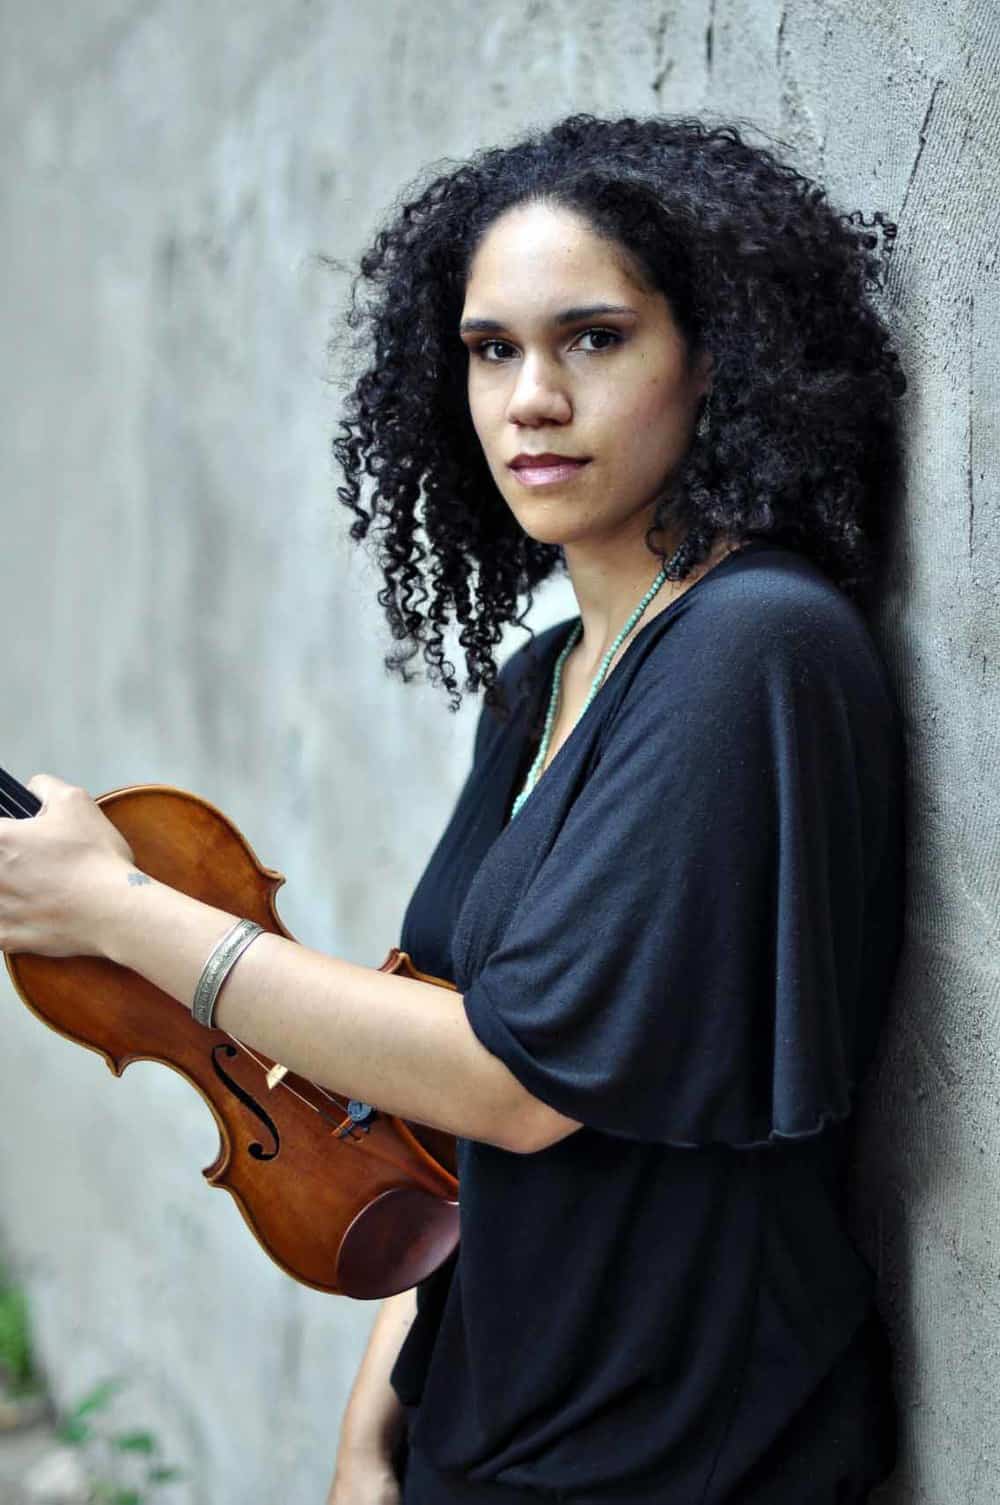 Internationally acclaimed composer and violinist Jessie Montgomery stands with her violin. Press photo courtesy of the BSO and the composer.